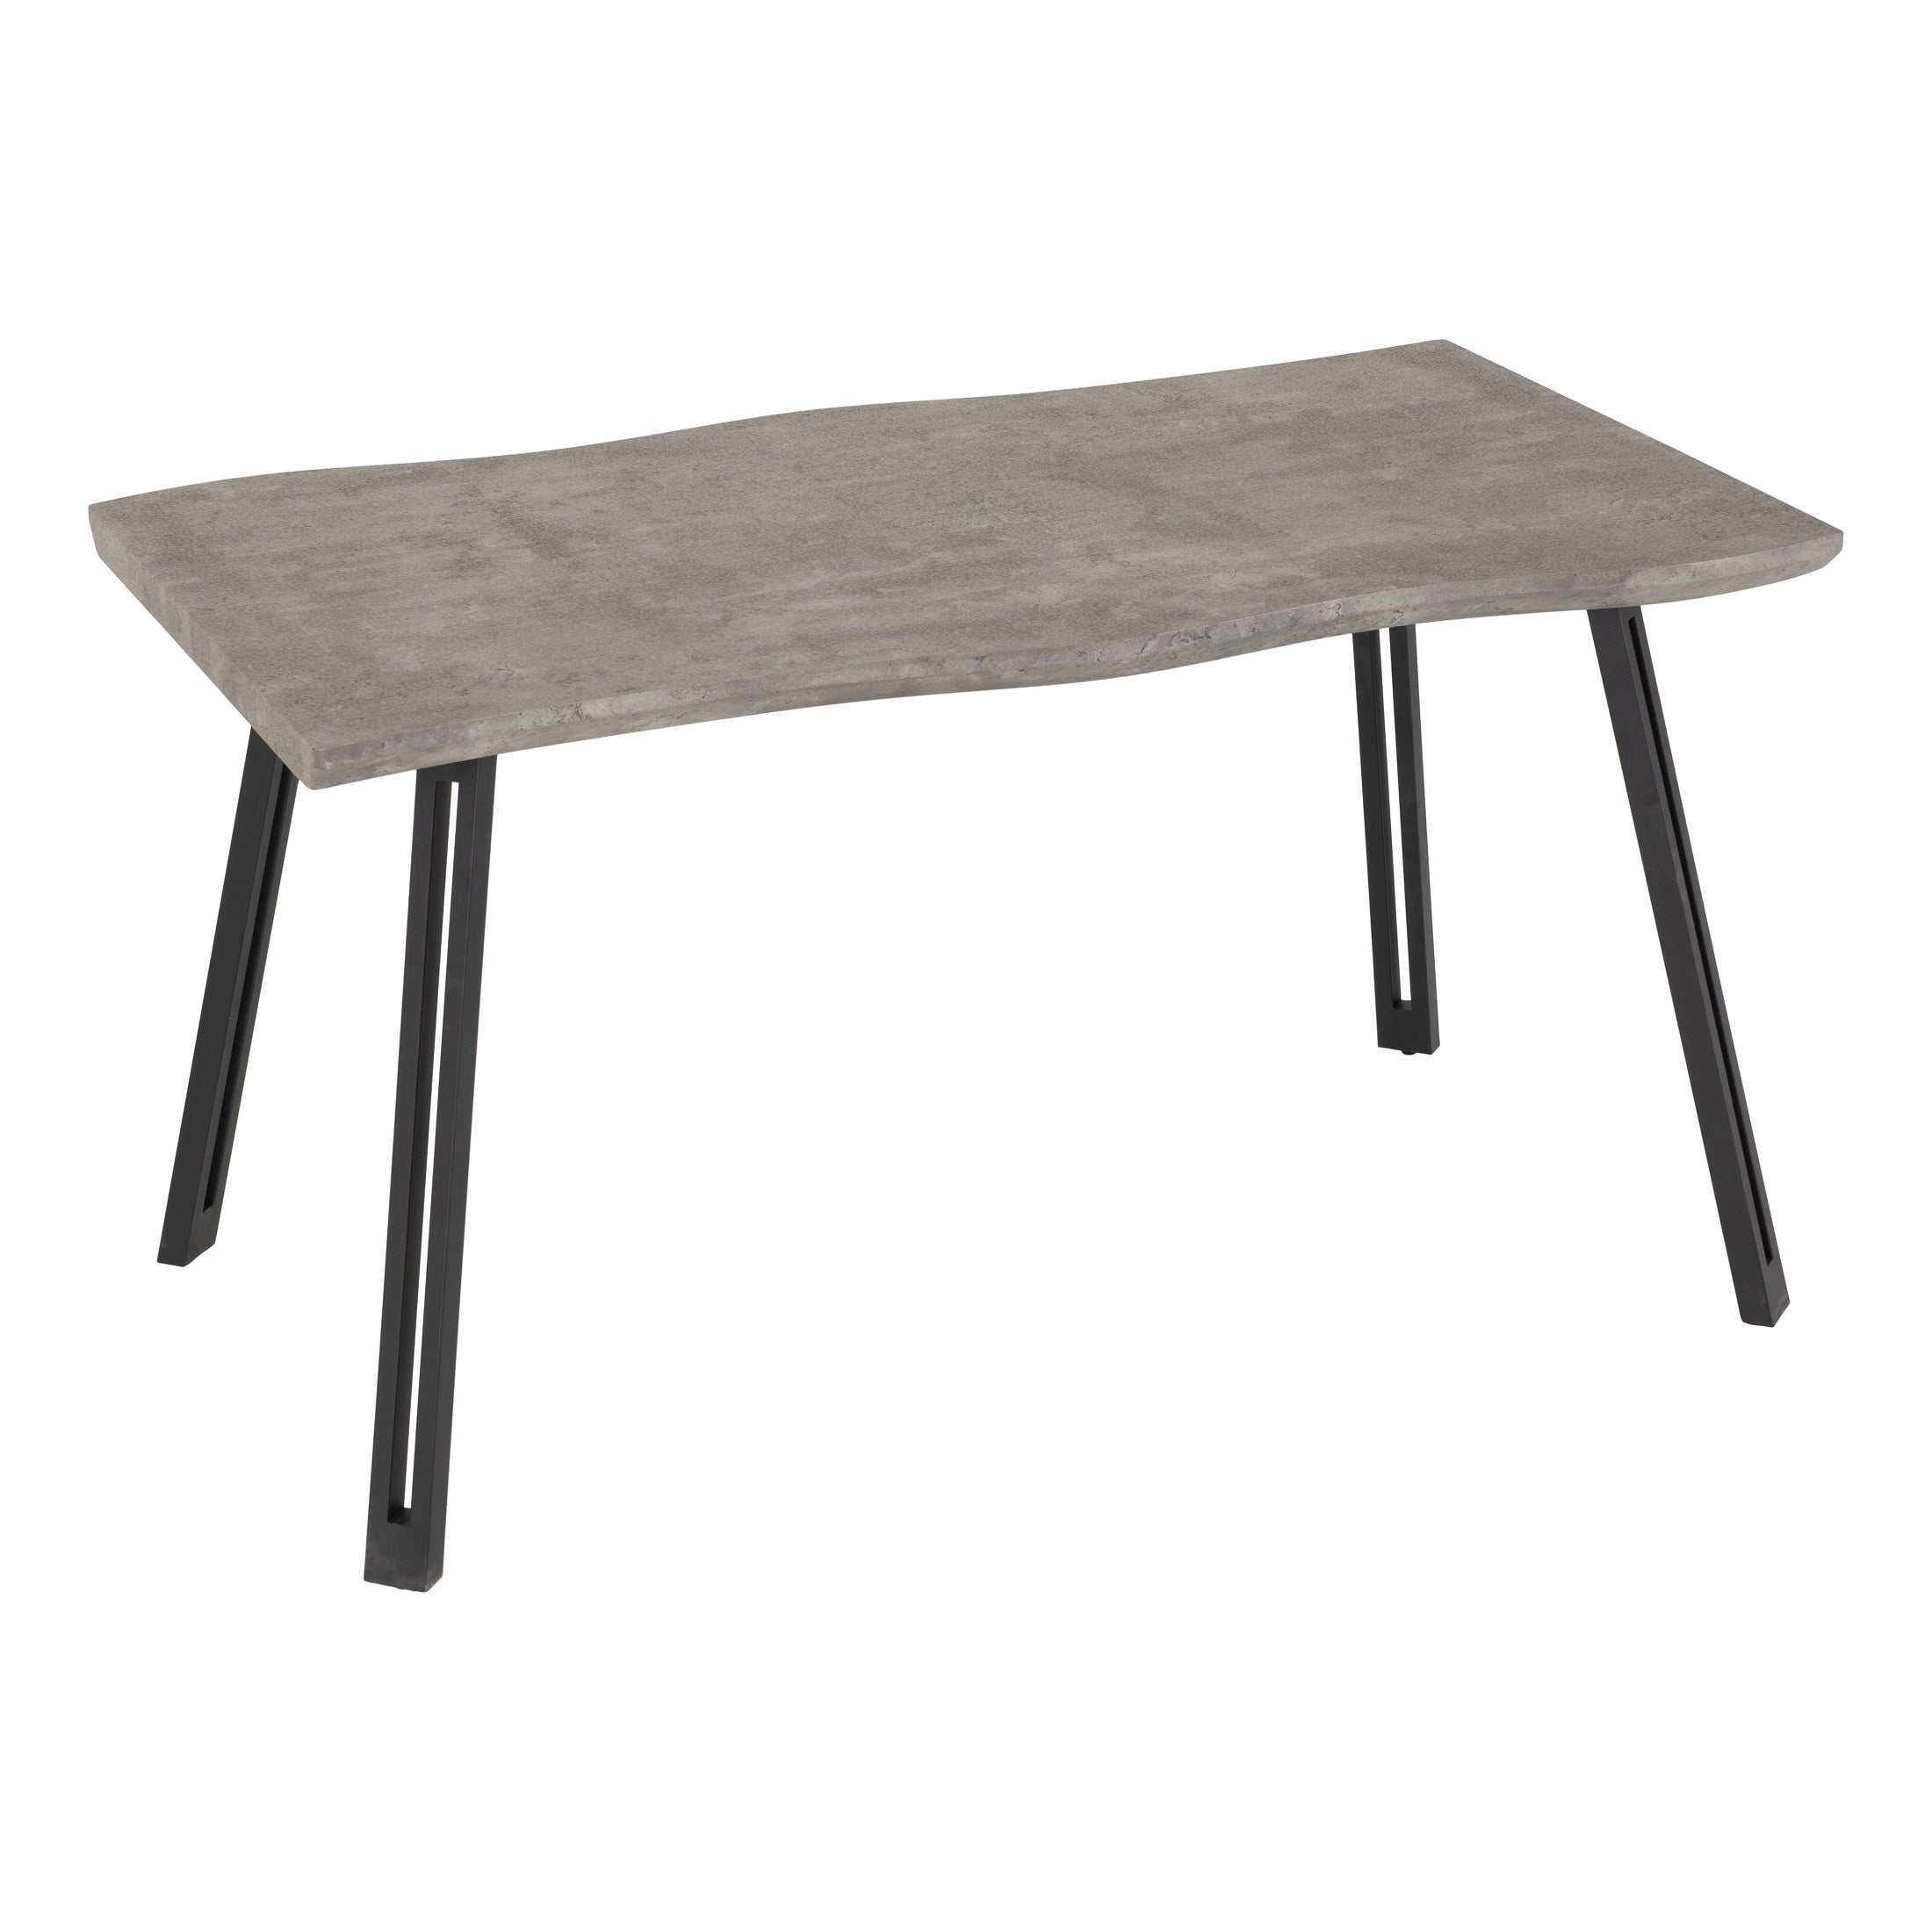 Quebec Wave 4 Seater Rectangular Dining Table Grey Concrete Effect Grey